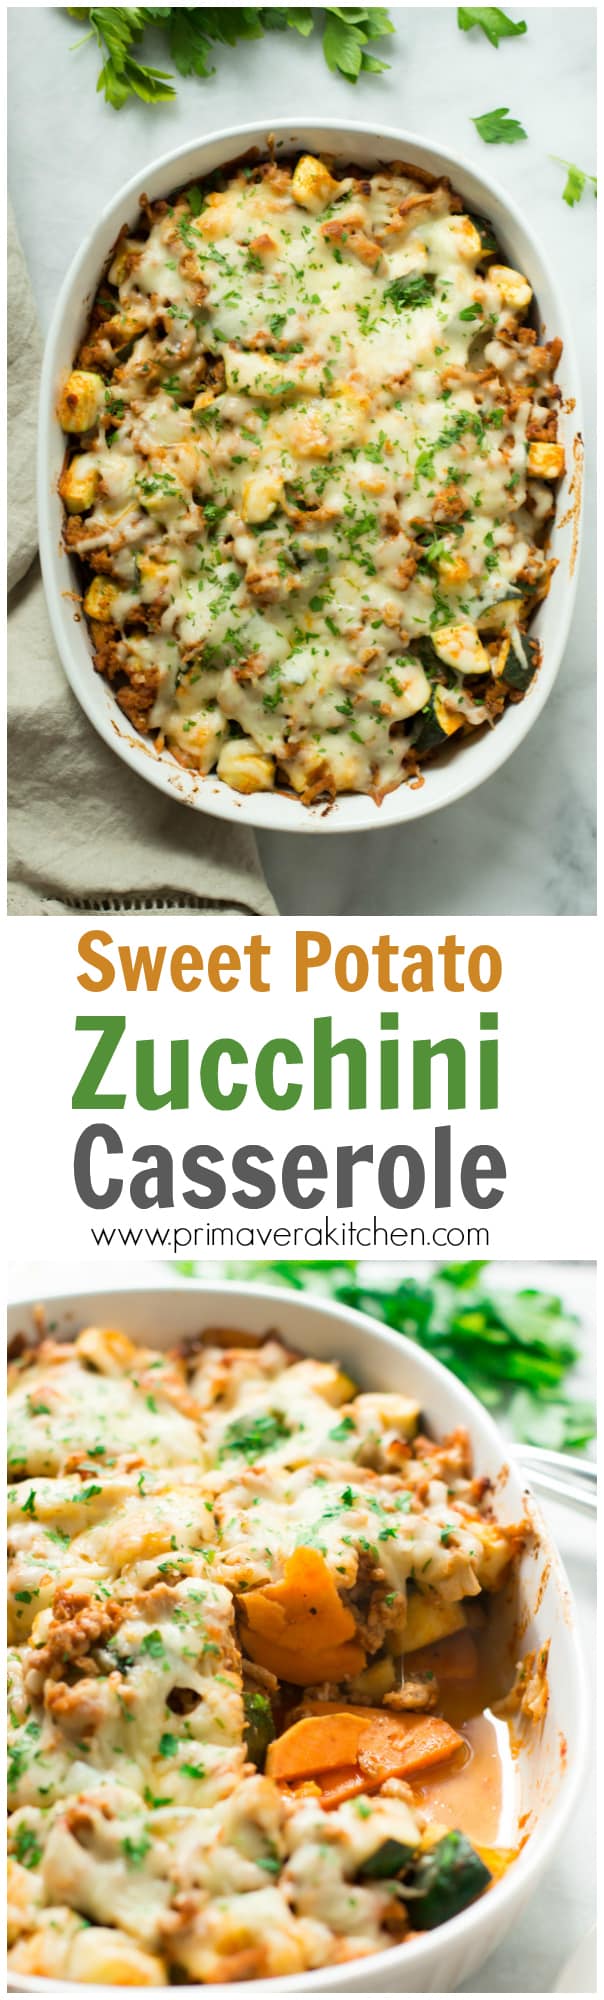 sweet-potato-zucchini-casserole - This Sweet Potato Zucchini Casserole recipe is incredible flavourful, gluten-free, easy to make and it'll be on your table in less than 30 minutes. It's also an one-pan meal loaded with protein, vitamins and nutrients.